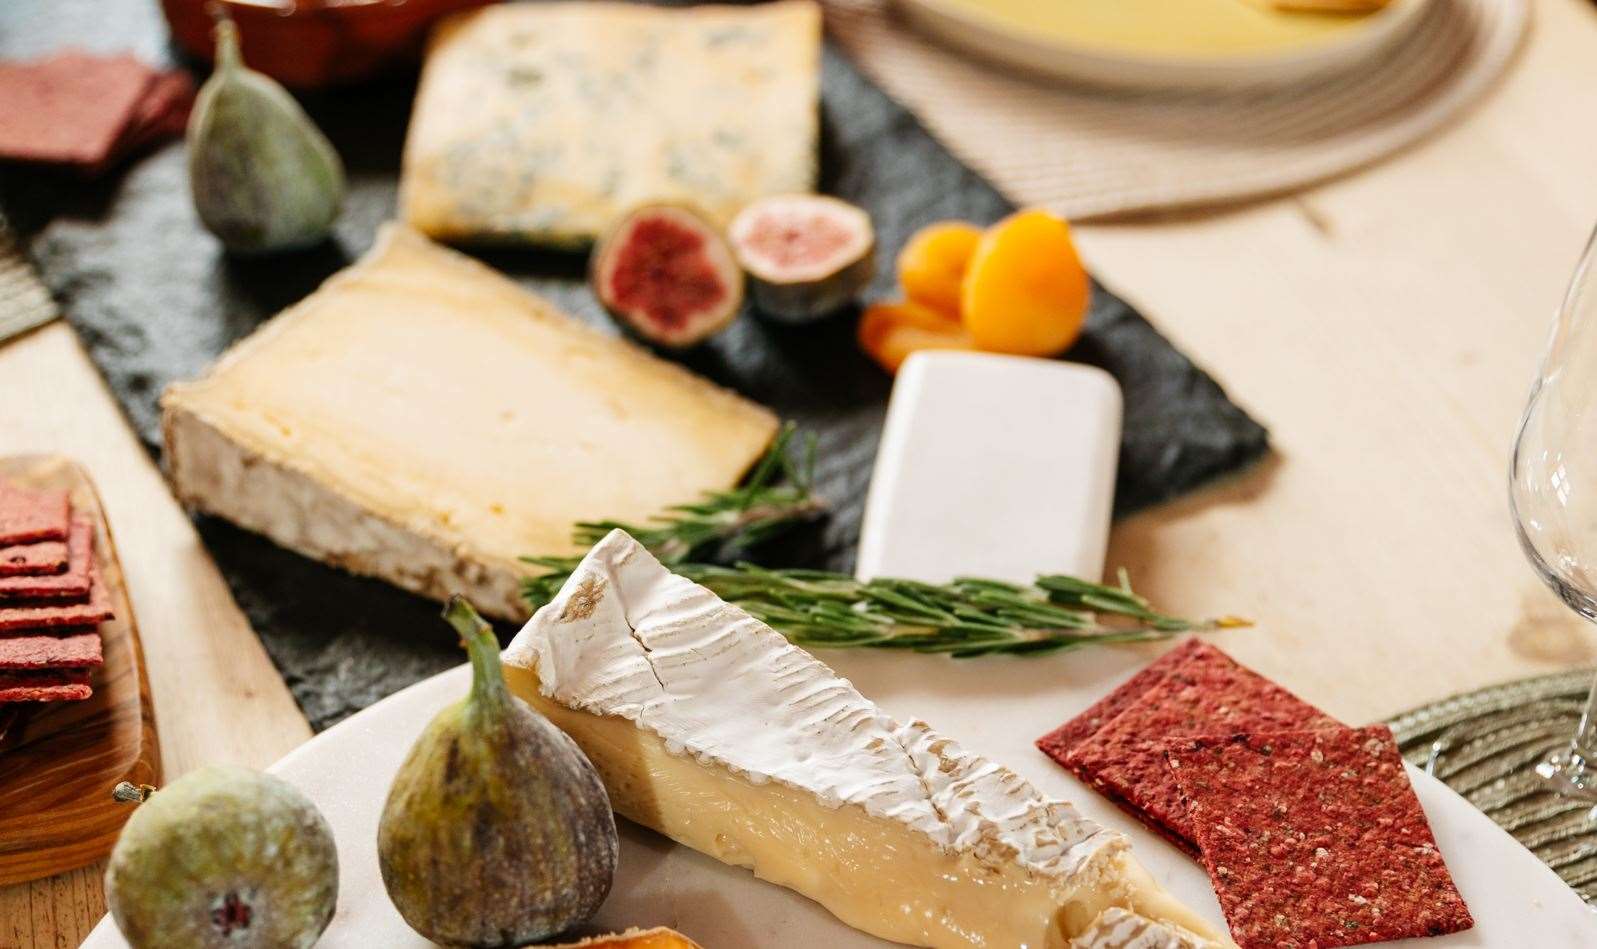 A new cheese delivery service will send cheeses and accompaniments to subscribers